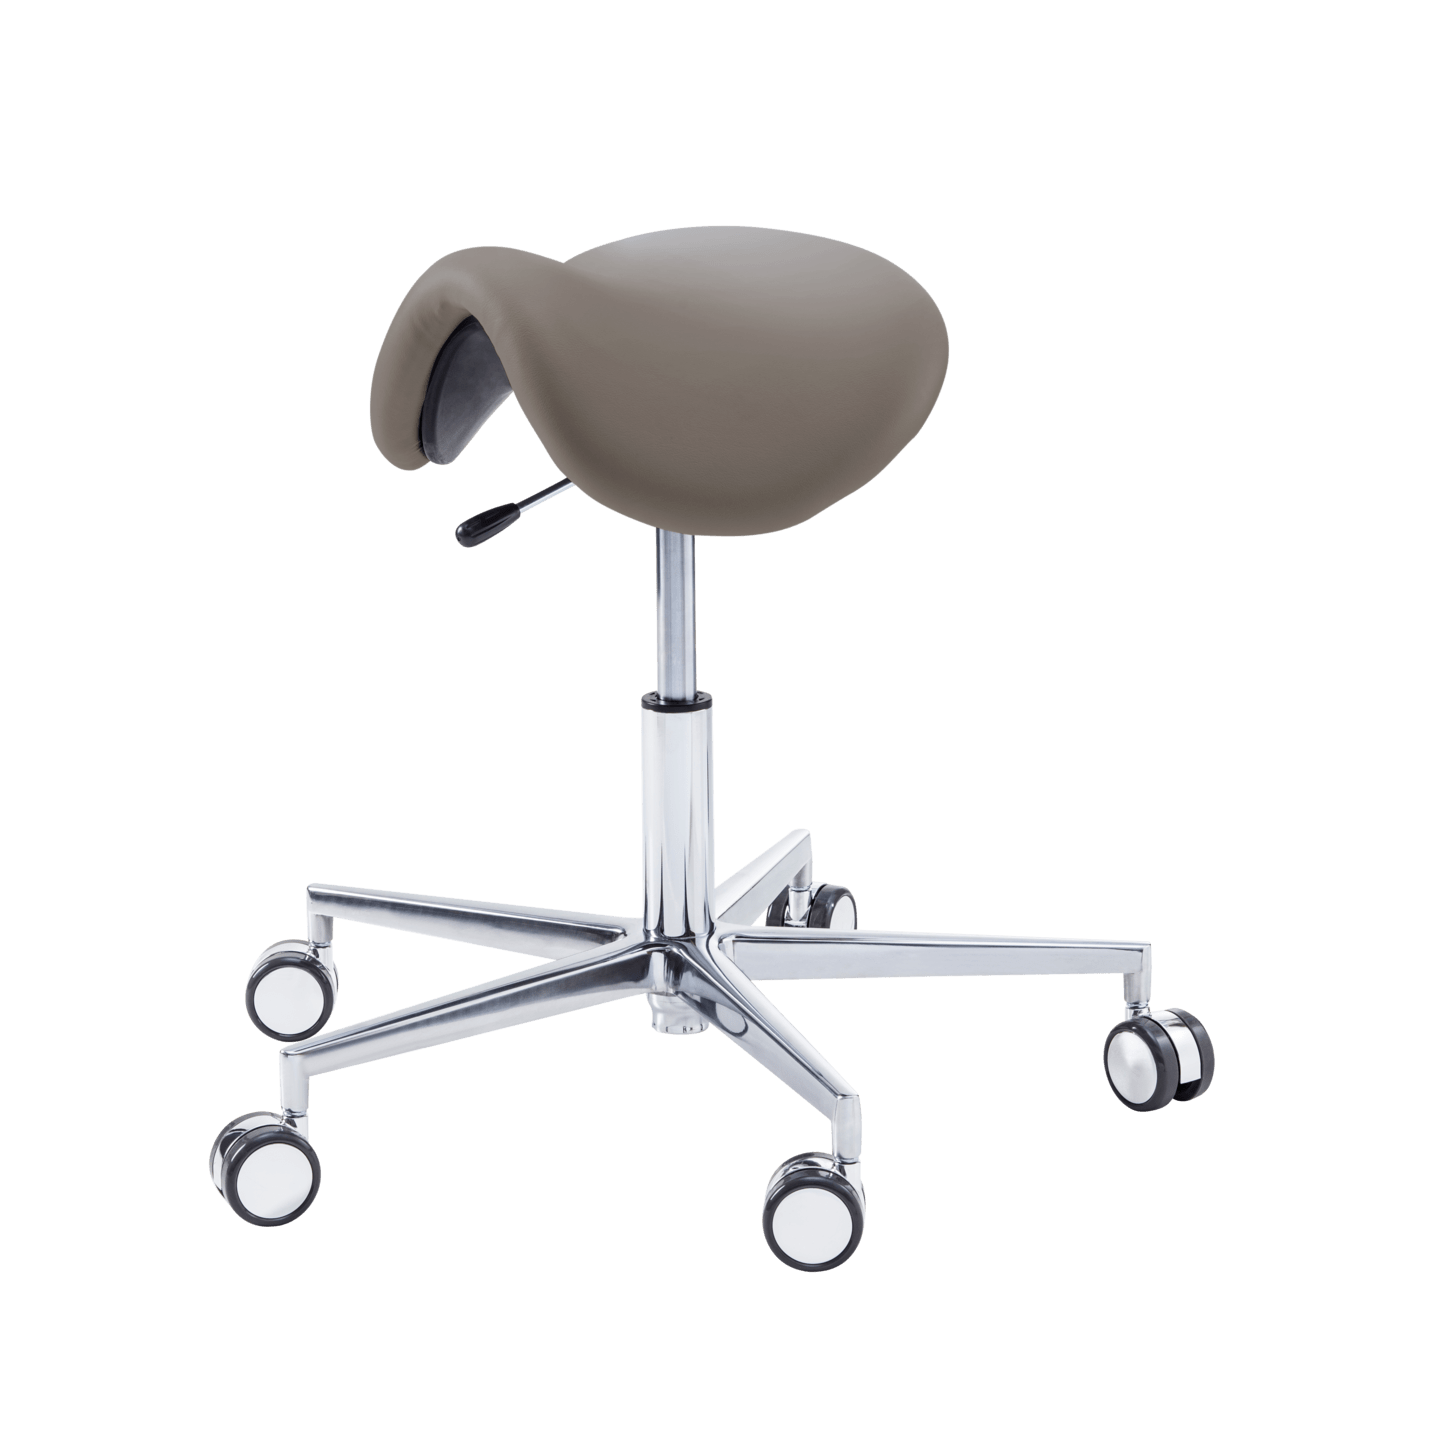 RUCK - STOOL saddle in stein